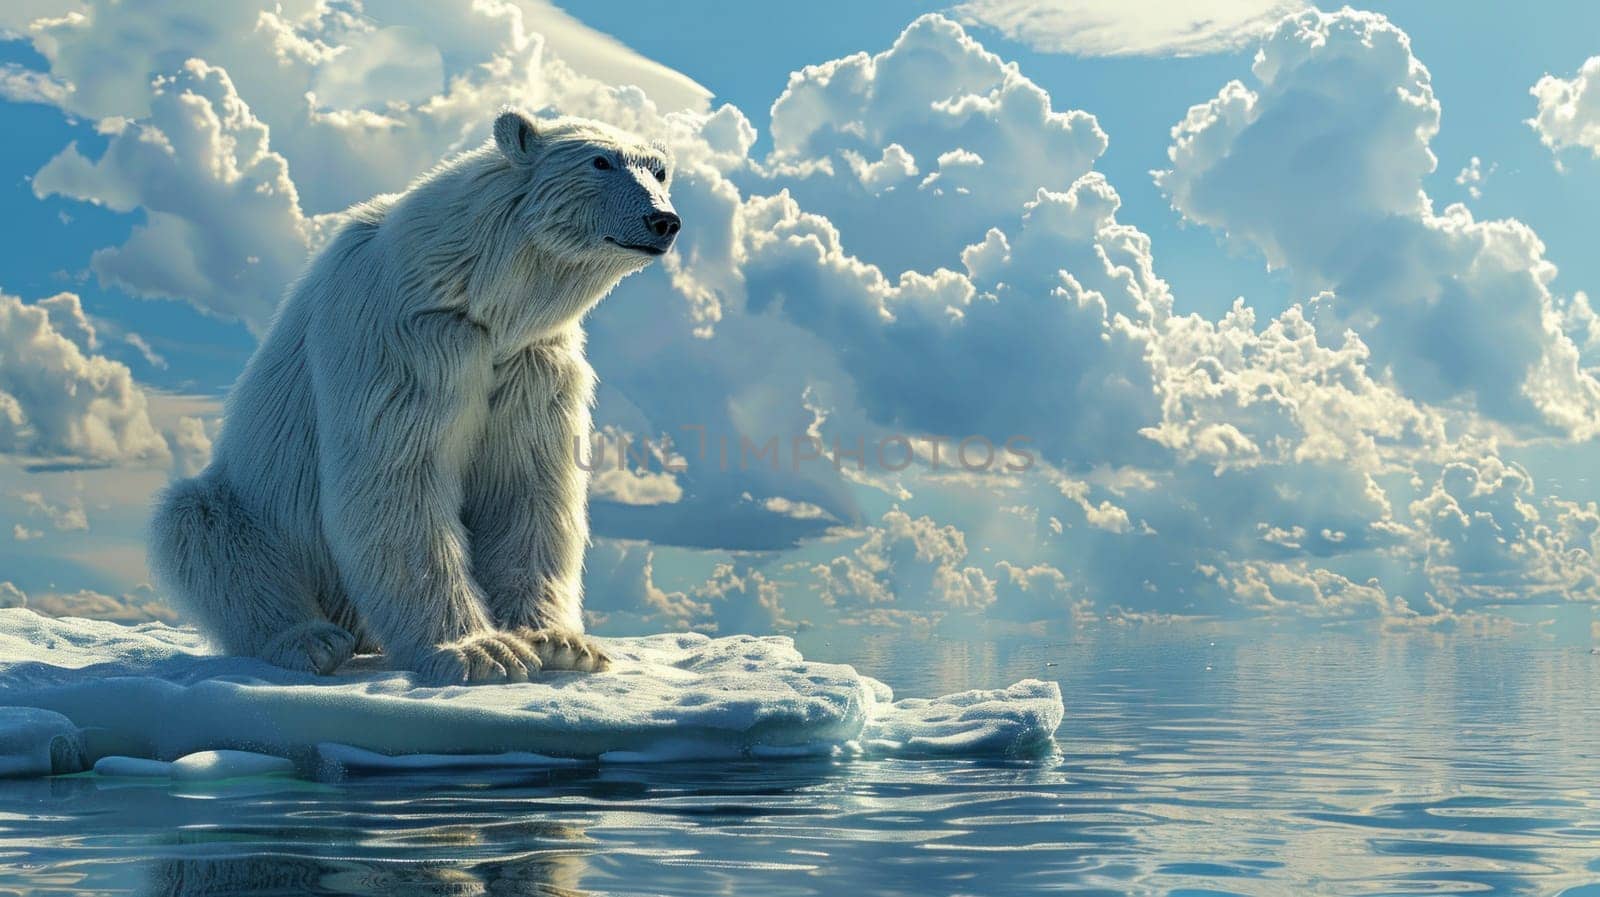 Polar bear sitting on ice floe in the middle of the ocean on arctic expedition journey by Vichizh